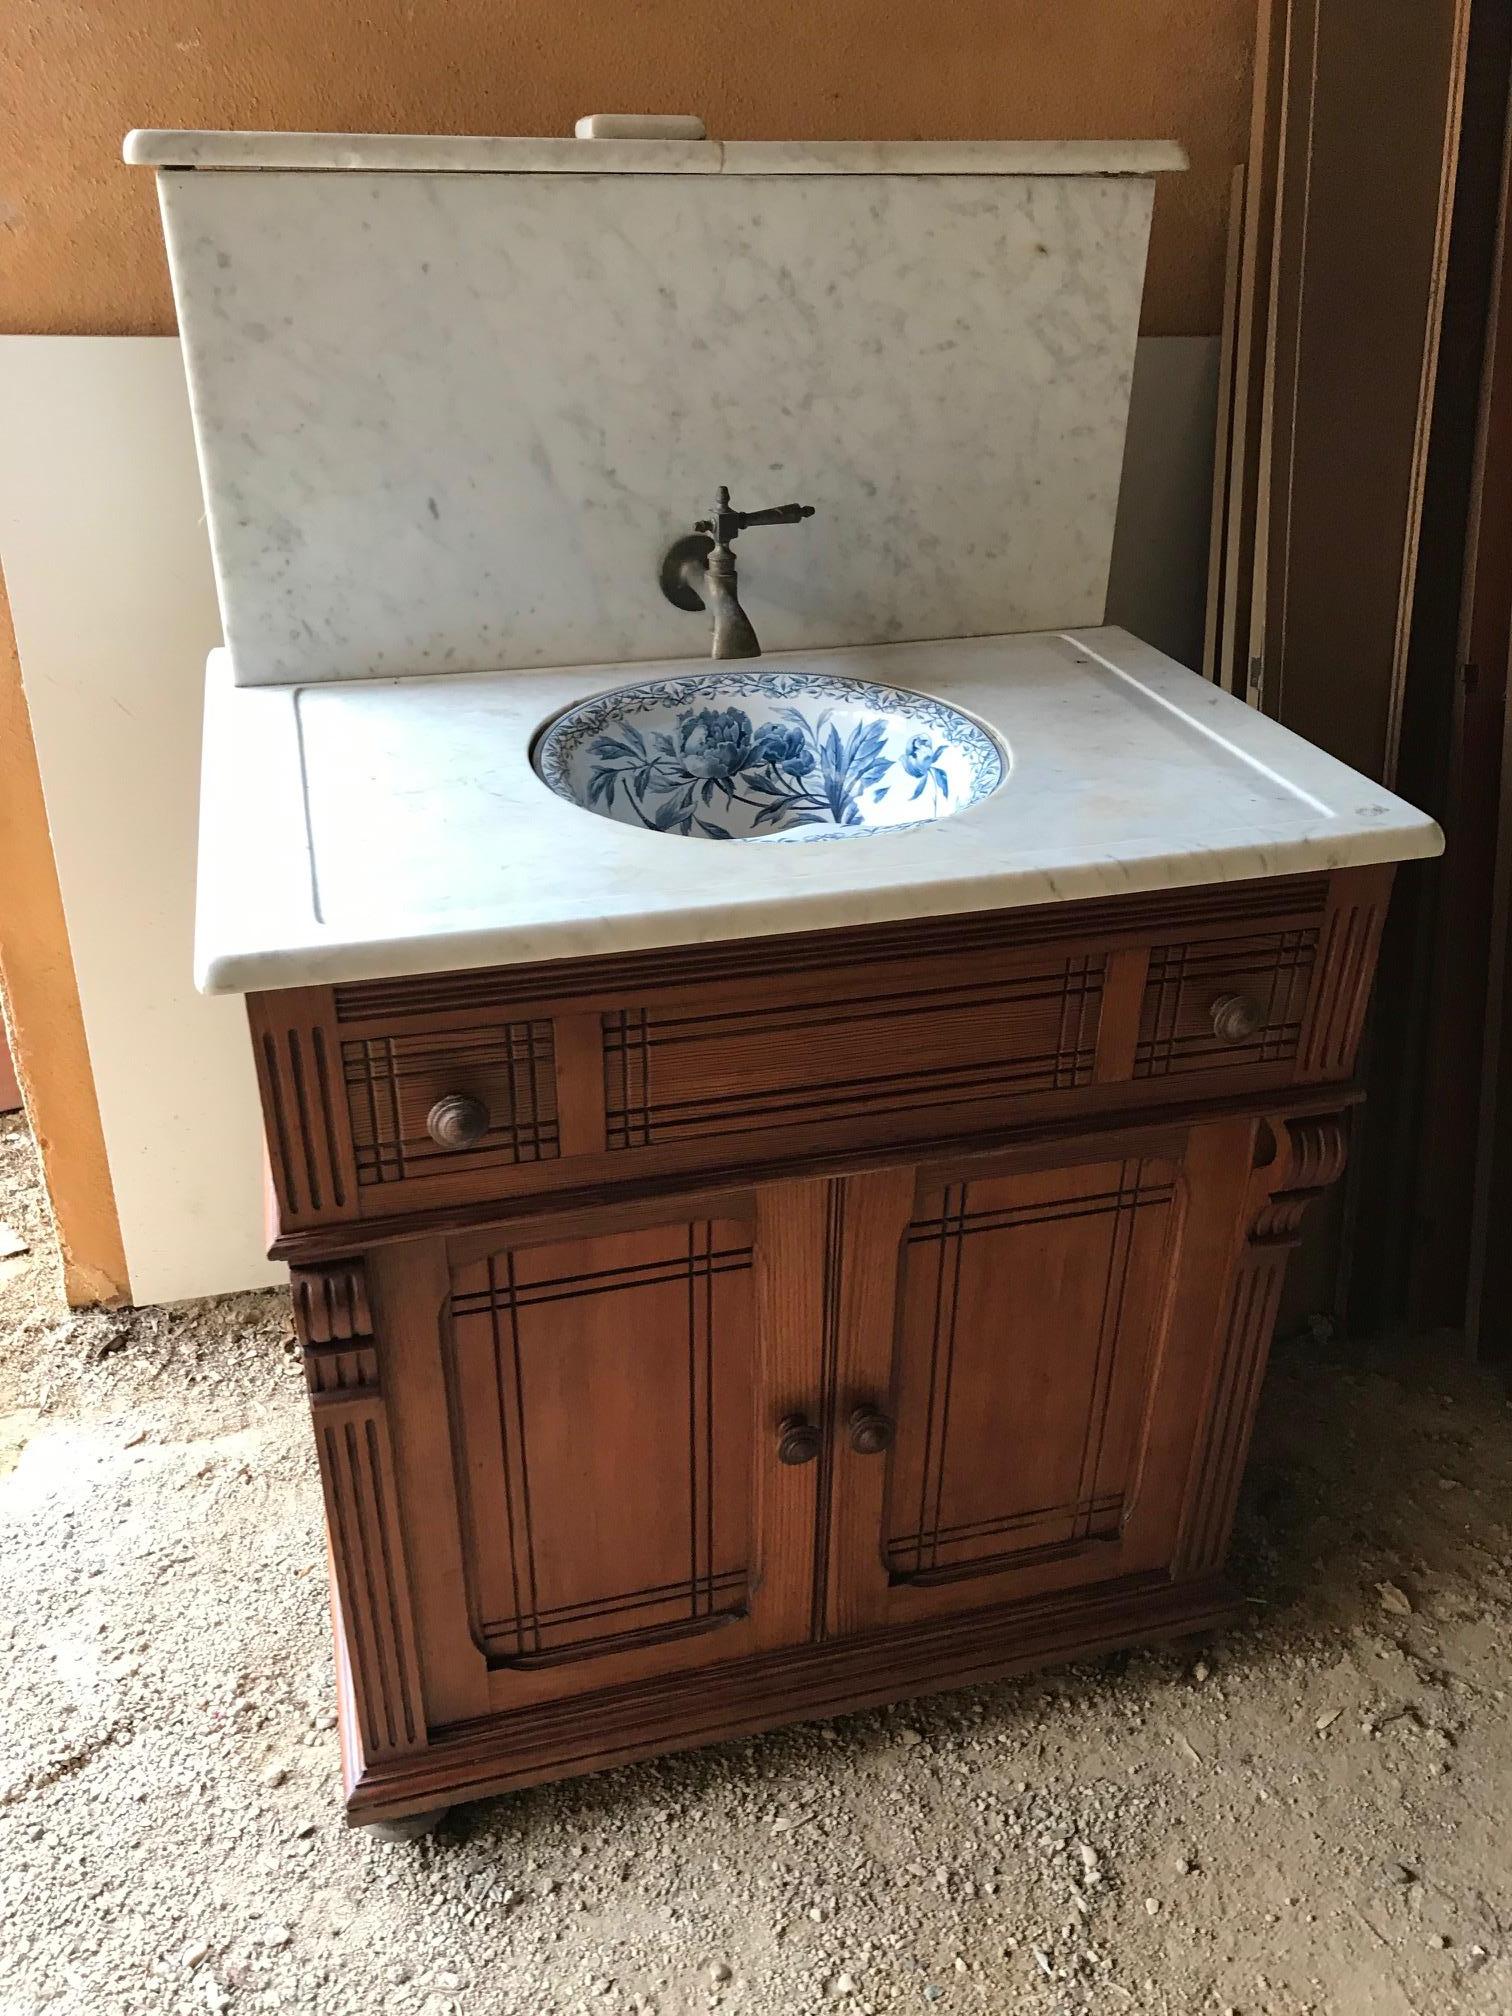 Very nice 20th century French pitch pine bathroom cabinet from the 1920s.
Made in Lyon (city in the south-east of France). You will find the label of the manufacture on the inside door. The tap is made with brass.
Beautiful white marble-top and